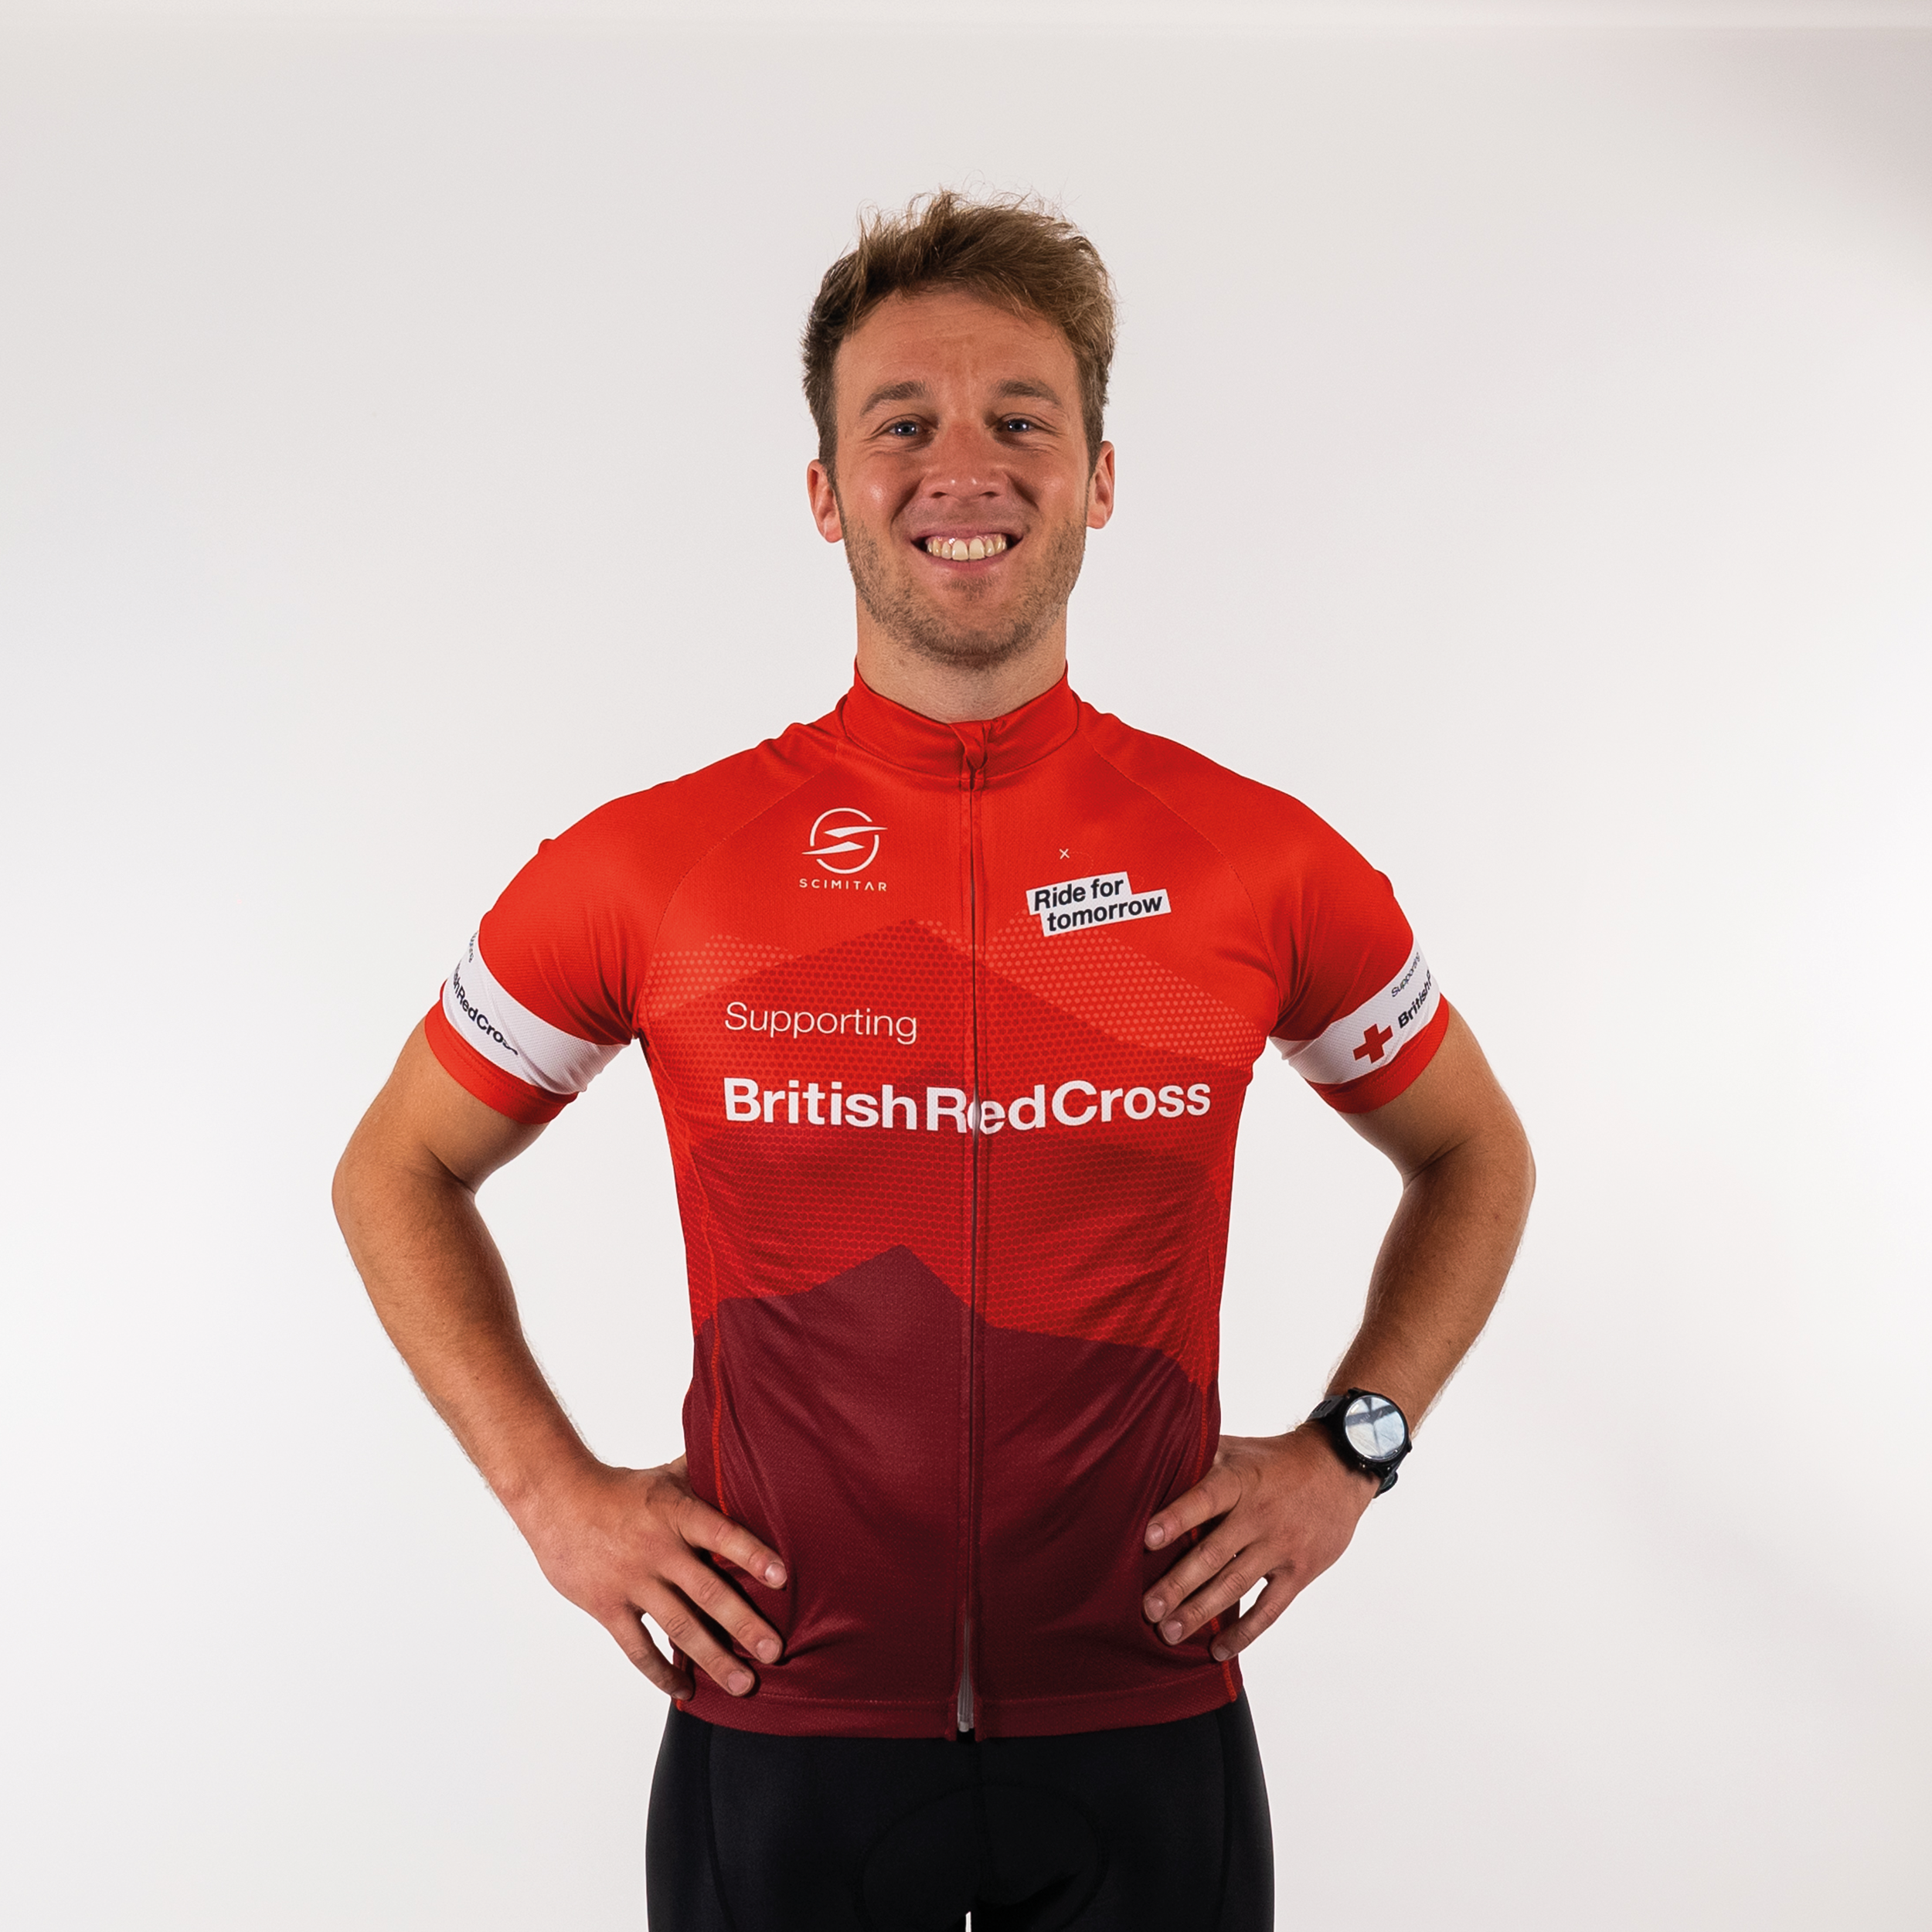 Model wearing red Ride for tomorrow jersey - unisex